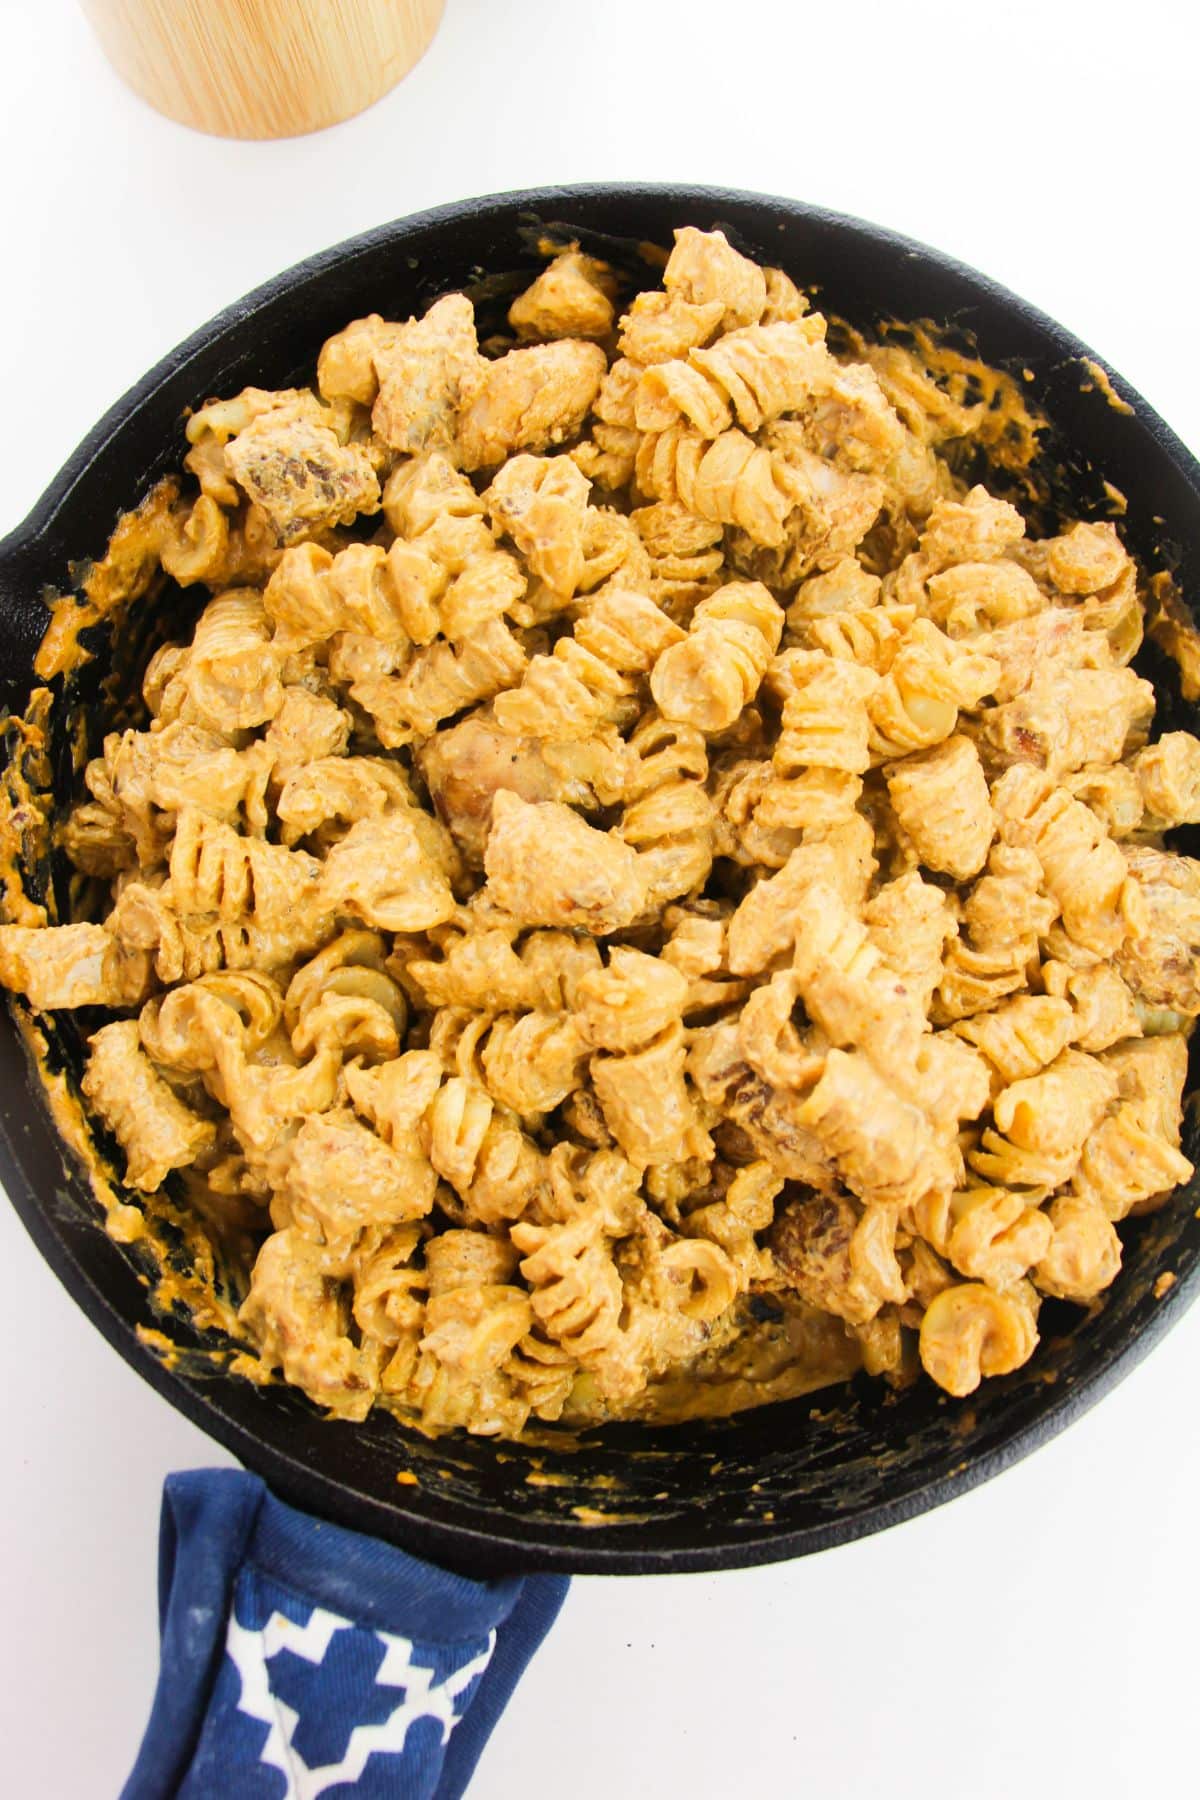 In a large skillet, chicken and pasta are being tossed together with the sauce.